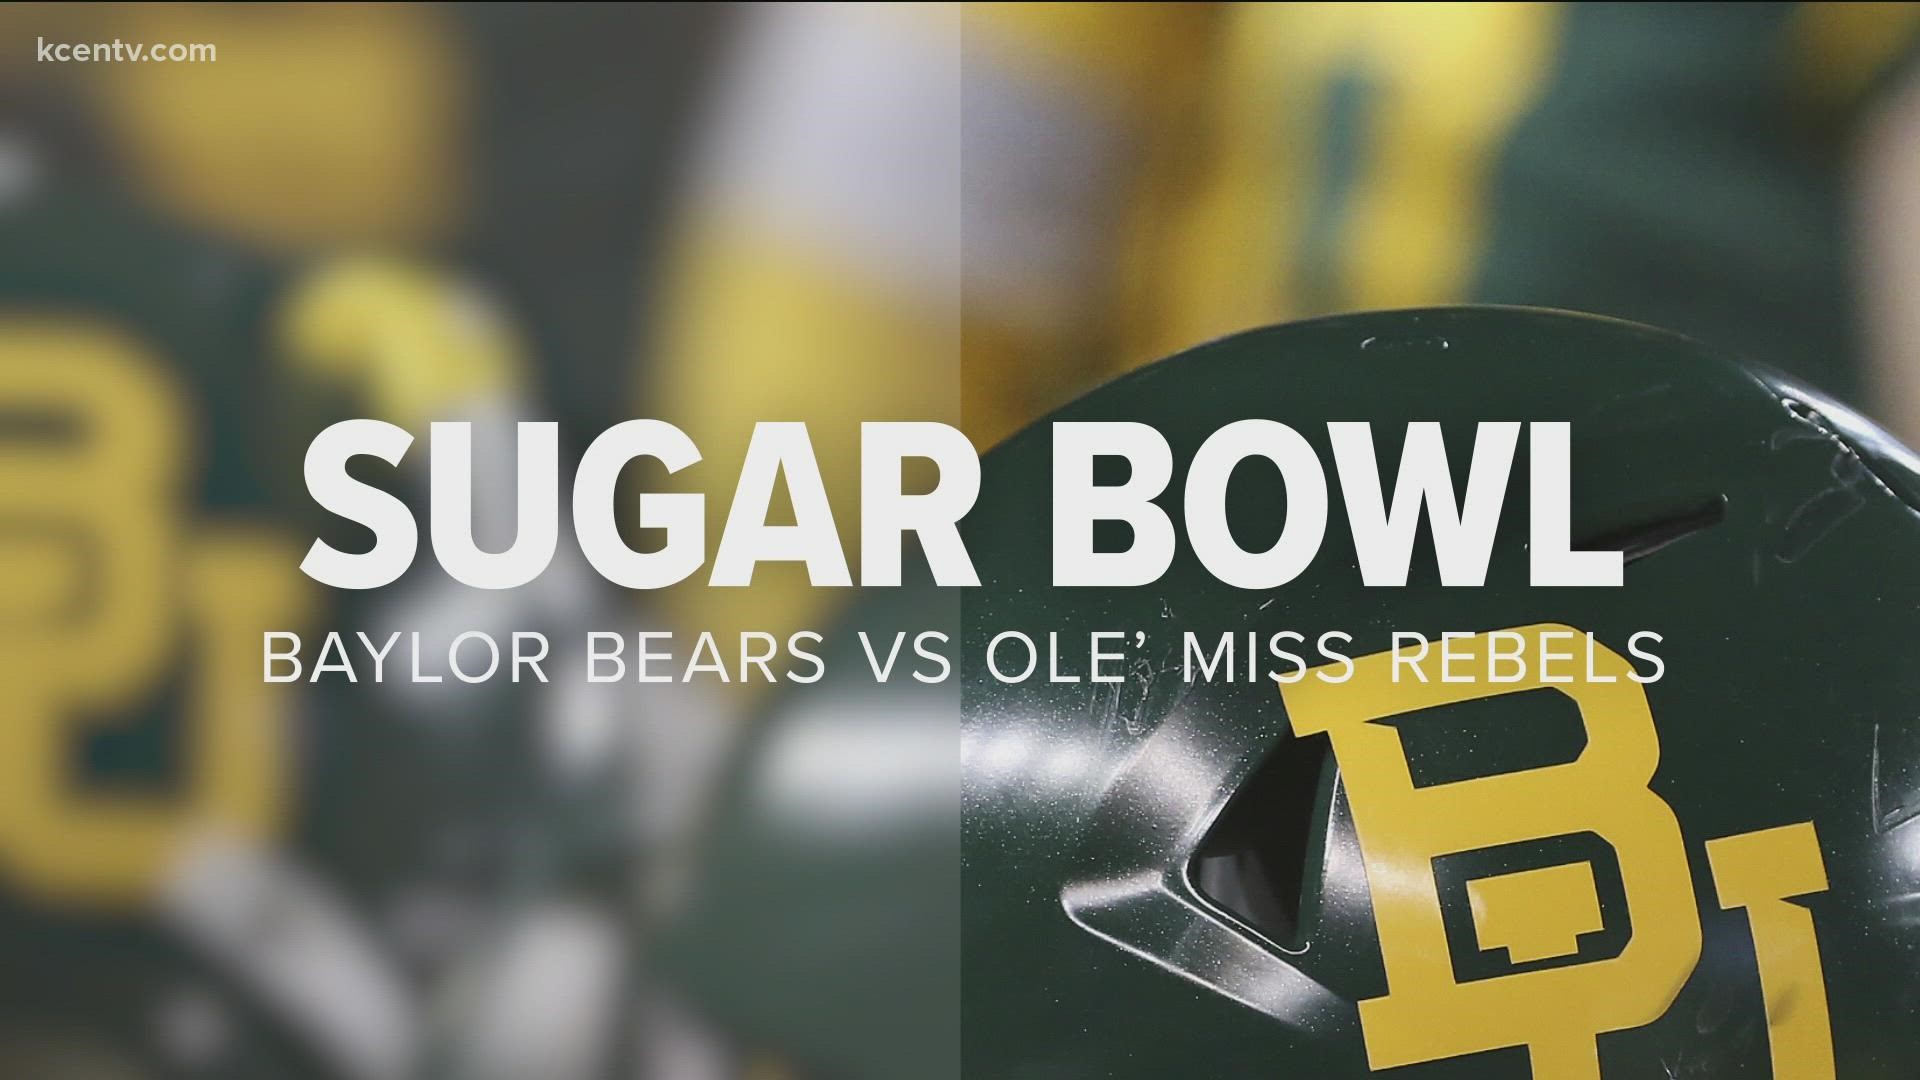 6 News Sports is live in NOLA as the Baylor Bears take on Ole Miss at the Sugar Bowl.